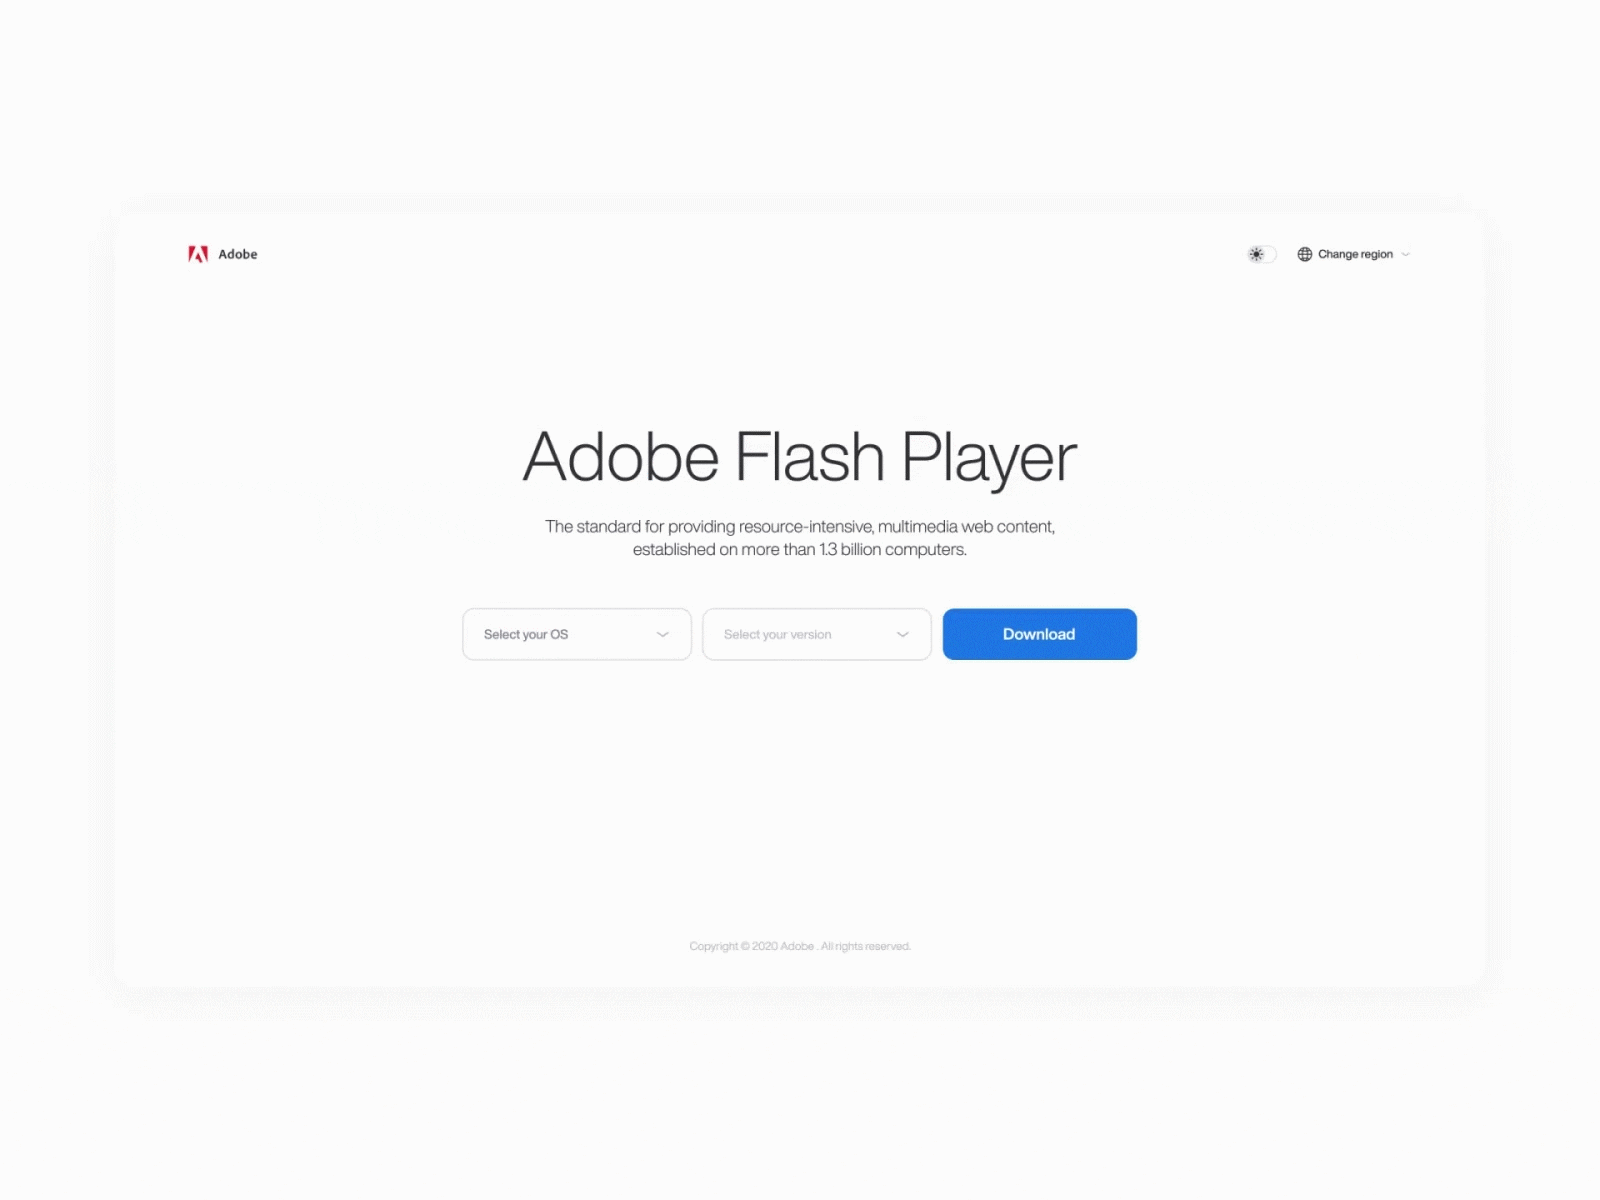 Download page | Adobe Flash Player adobe after effects animation animations desktop dribbble figma flash player redesign software web design